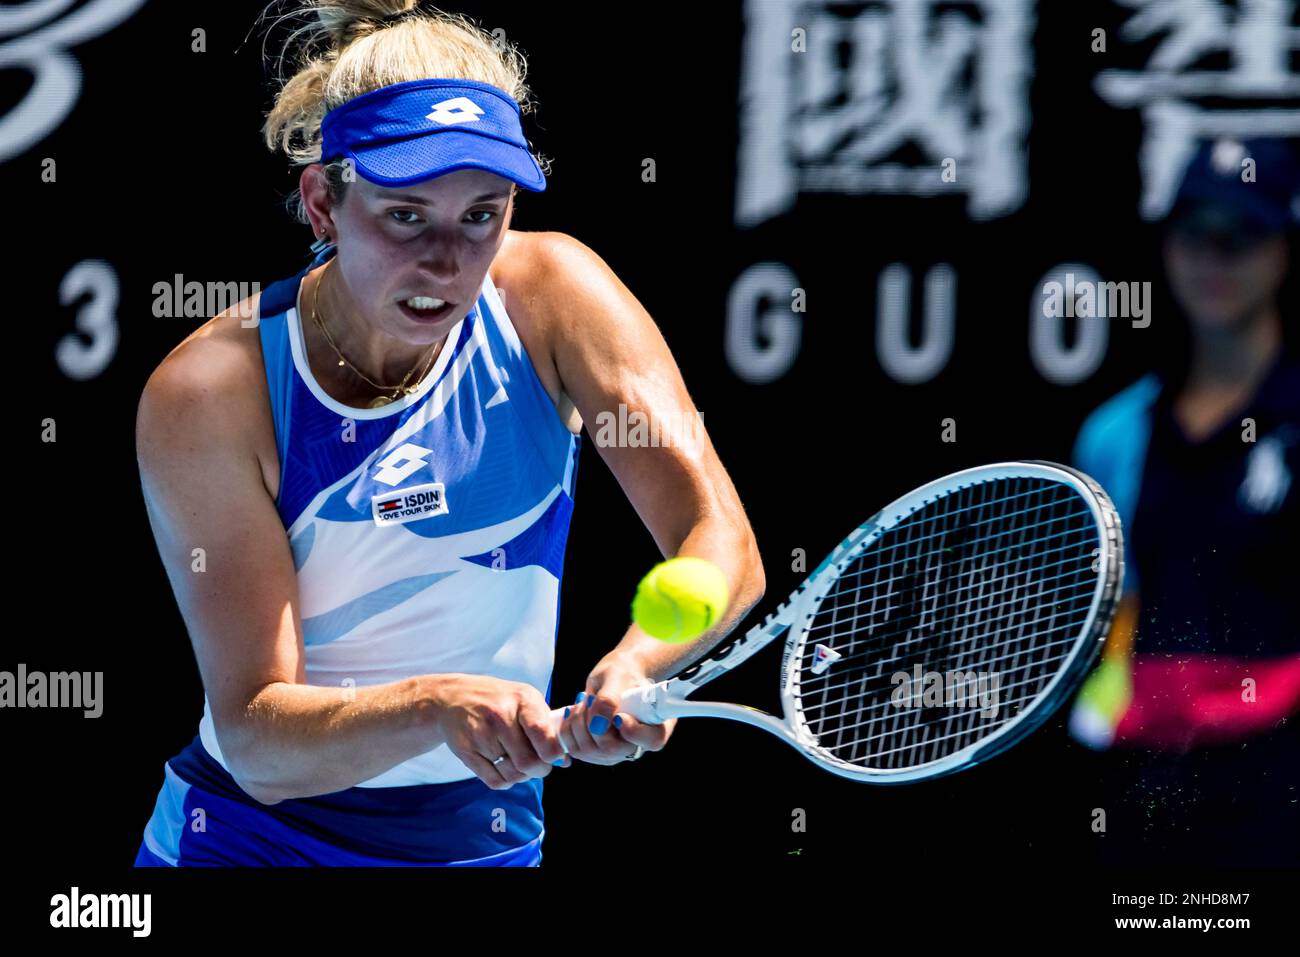 MELBOURNE, VIC - JANUARY 17: Elise Mertens of Belgium in action during  Round 1 of the 2023 Australian Open on January 17 2023, at Melbourne Park  in Melbourne, Australia. (Photo by Jason